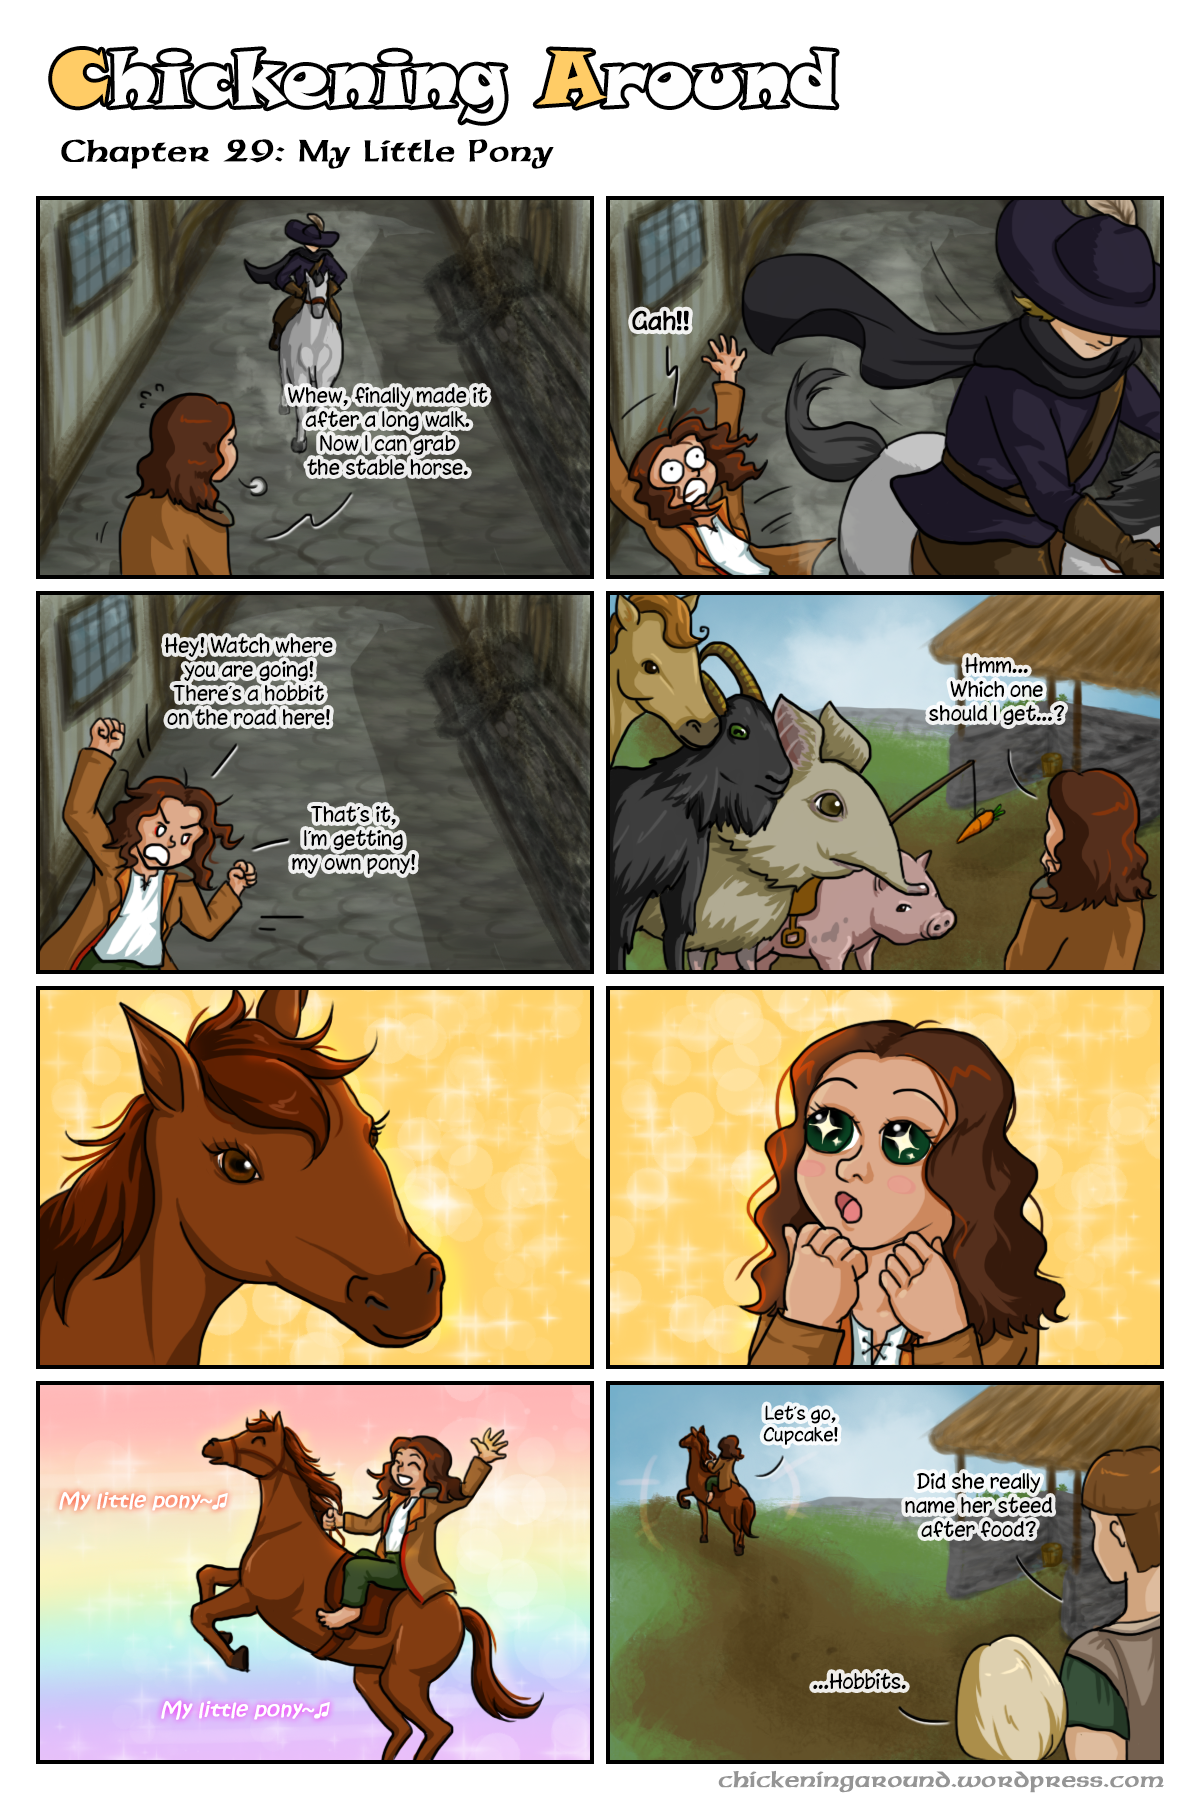 Chapter 29: My Little Pony